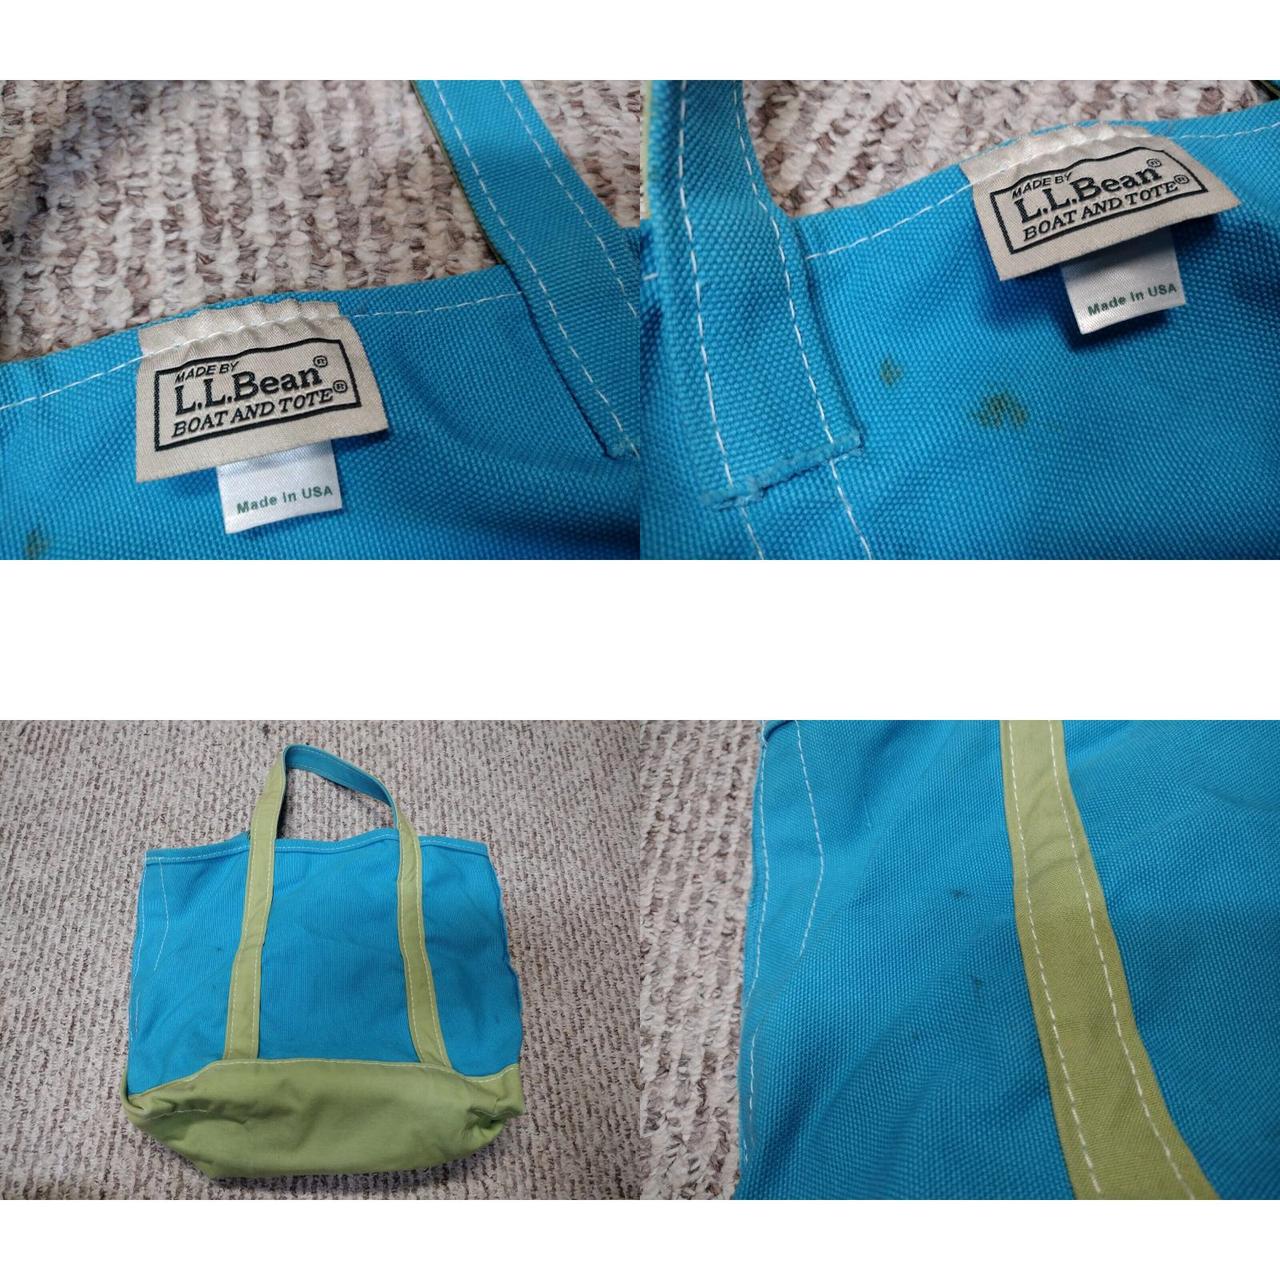 LL Bean Boat And Tote Canvas Bag USA Ivory White & - Depop